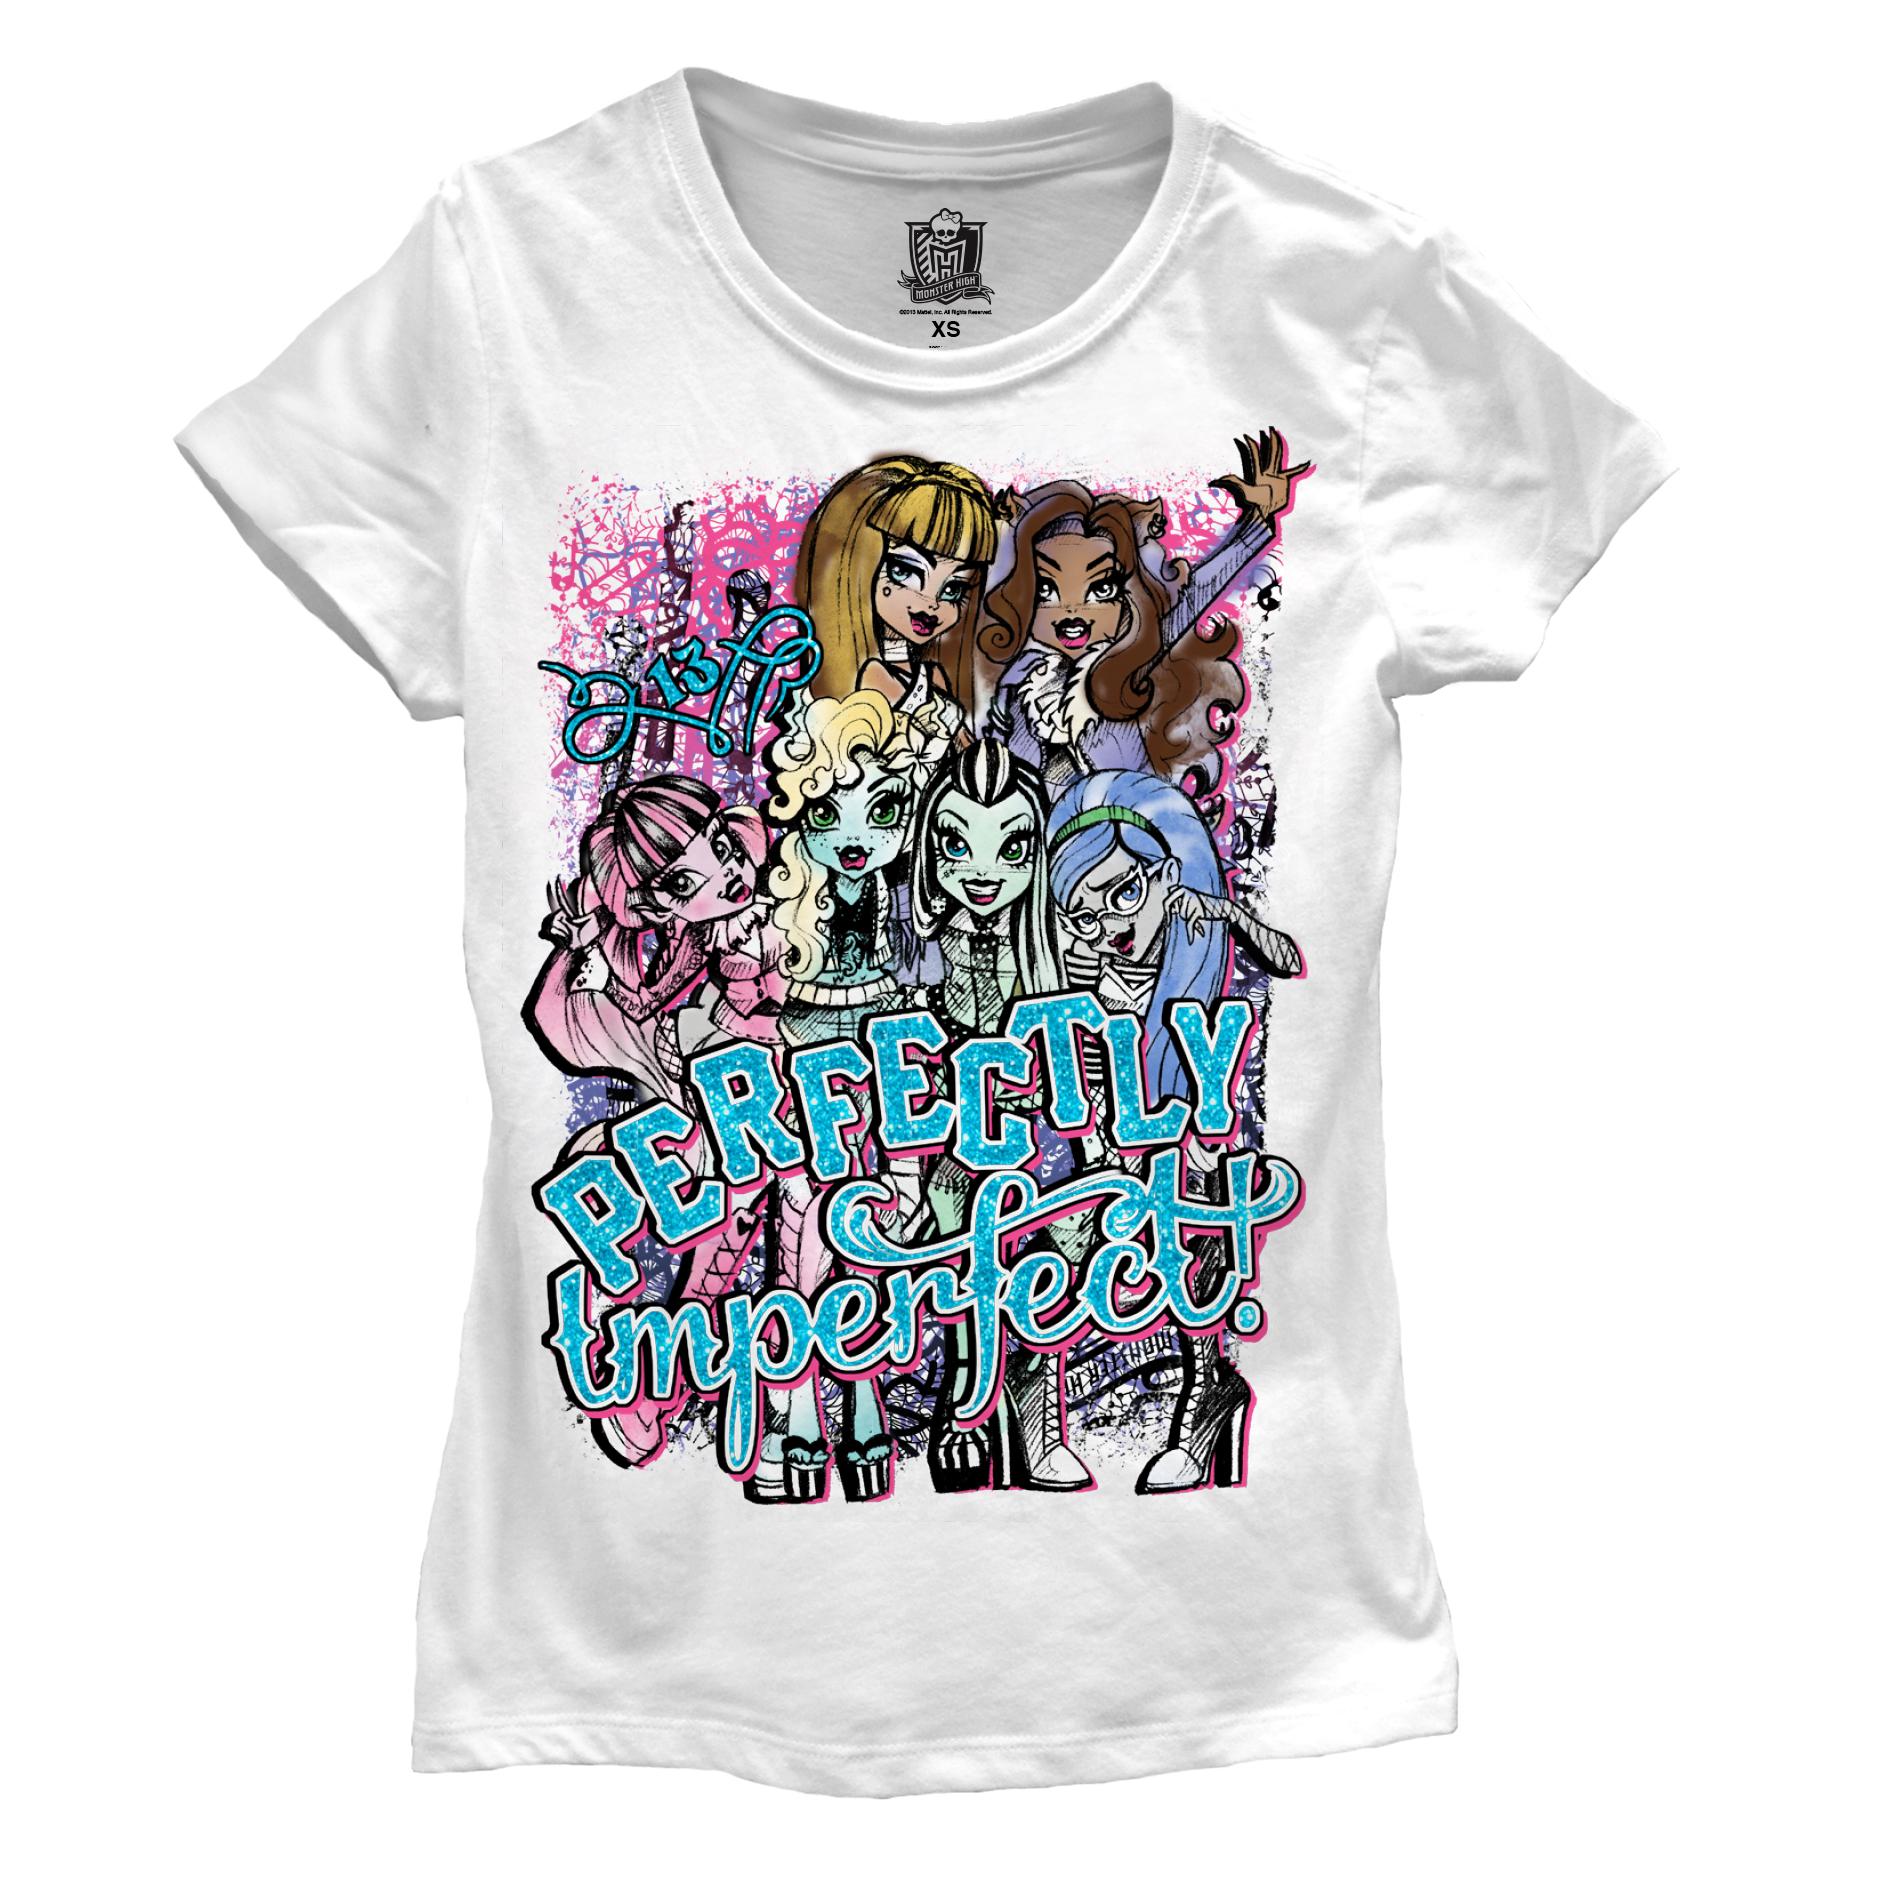 Monster High Girl's Graphic T-Shirt - Perfectly Imperfect